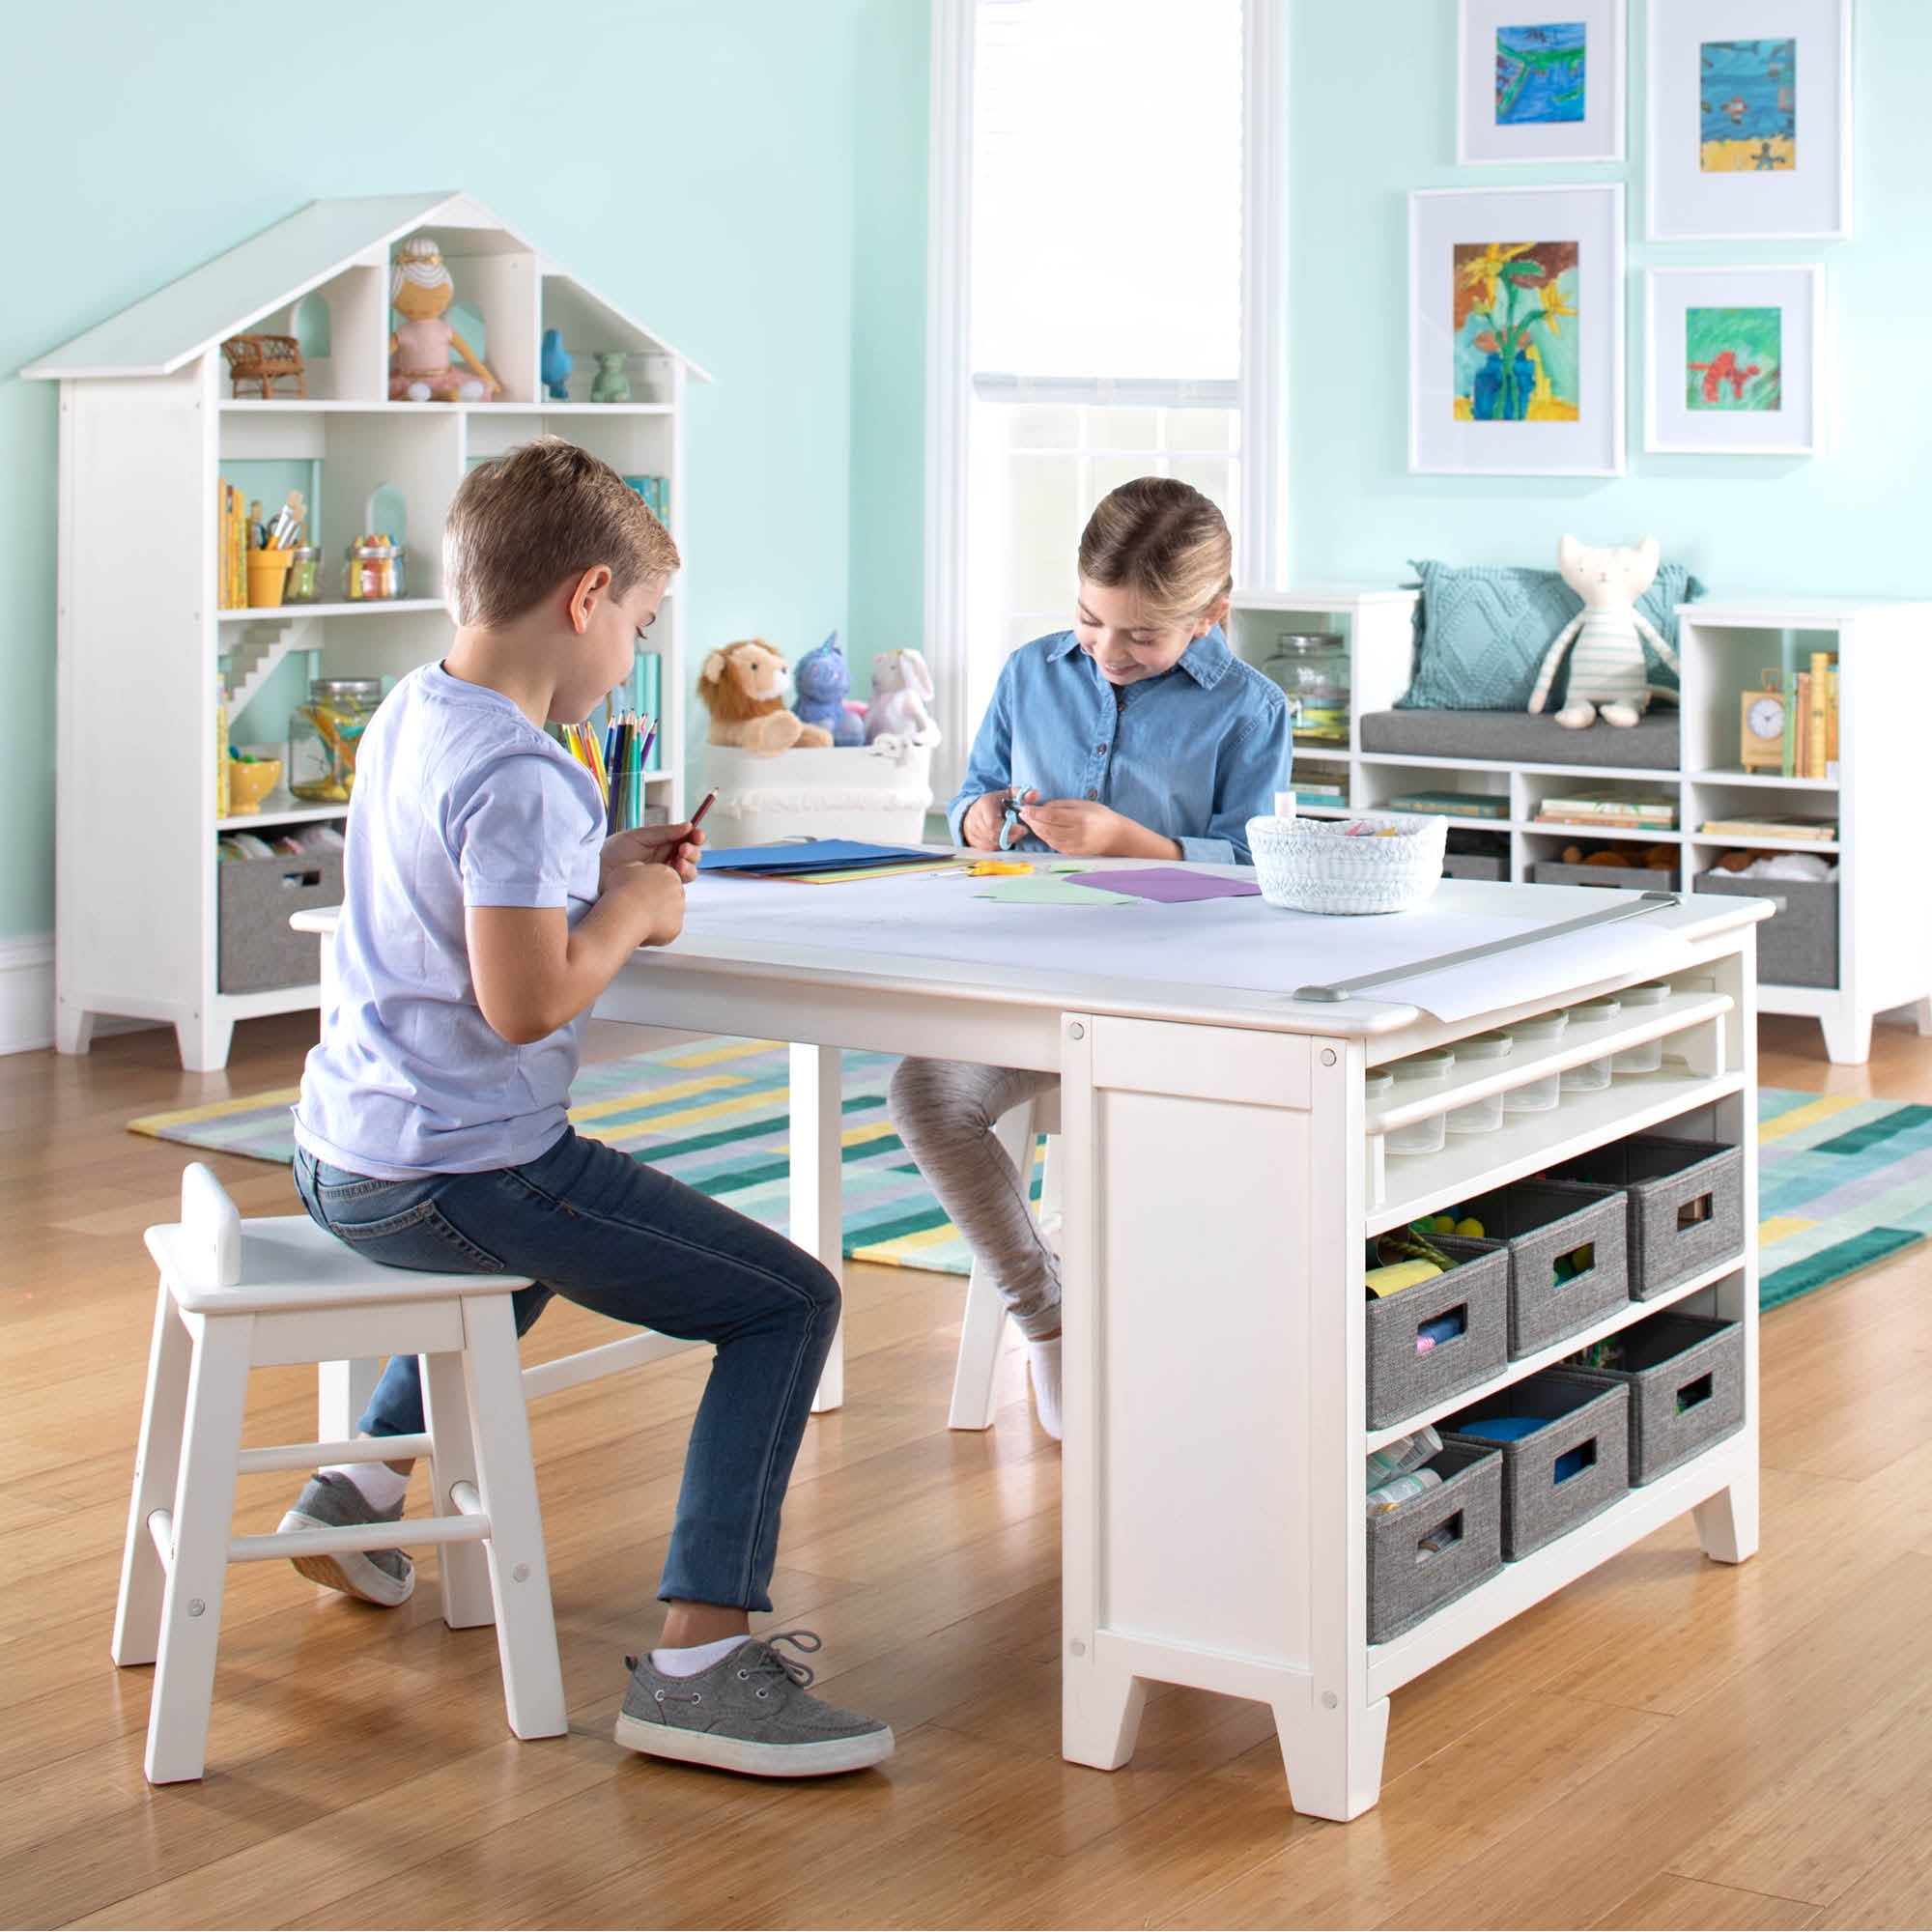 Martha Stewart Living and Learning Kids' Art Table and Stool Set (White) -  Wooden Drawing and Painting Desk with Paper Roller, Paint Cups and